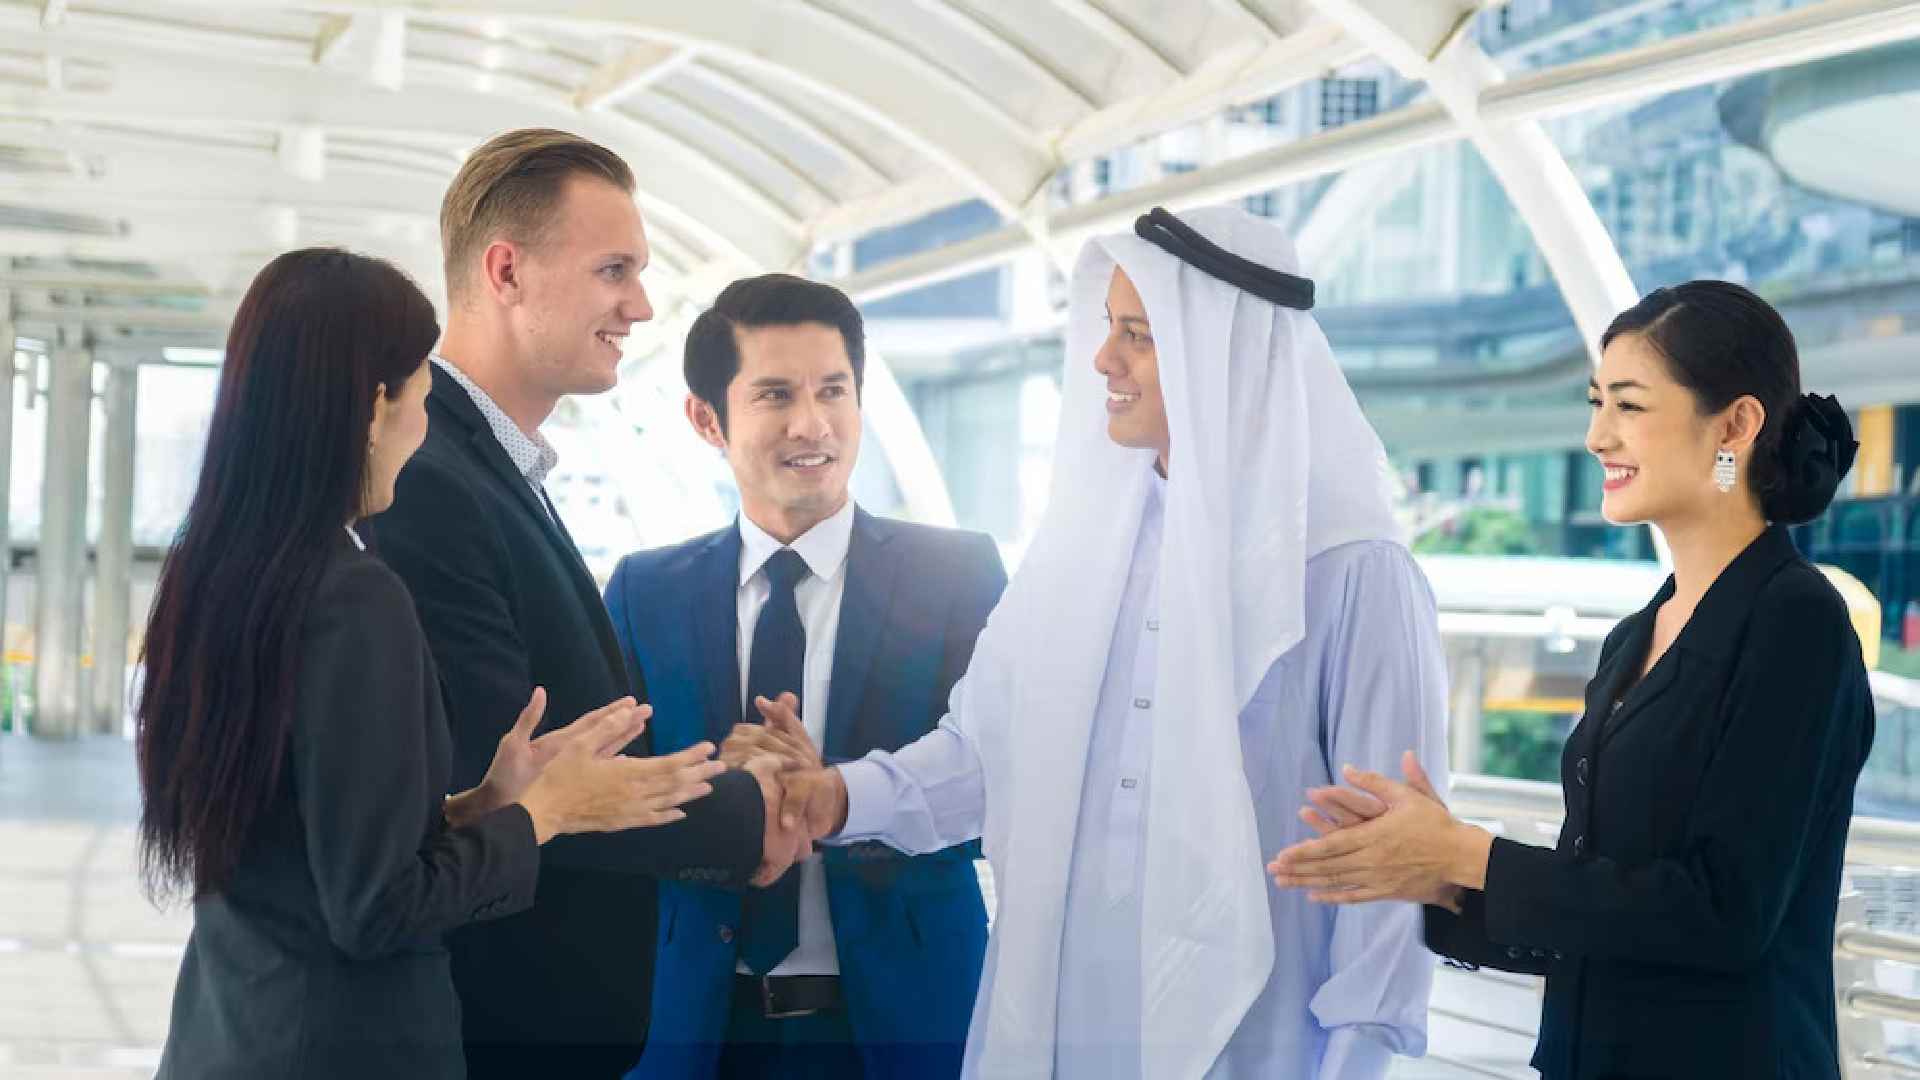 starting a business in dubai as a foreigner 